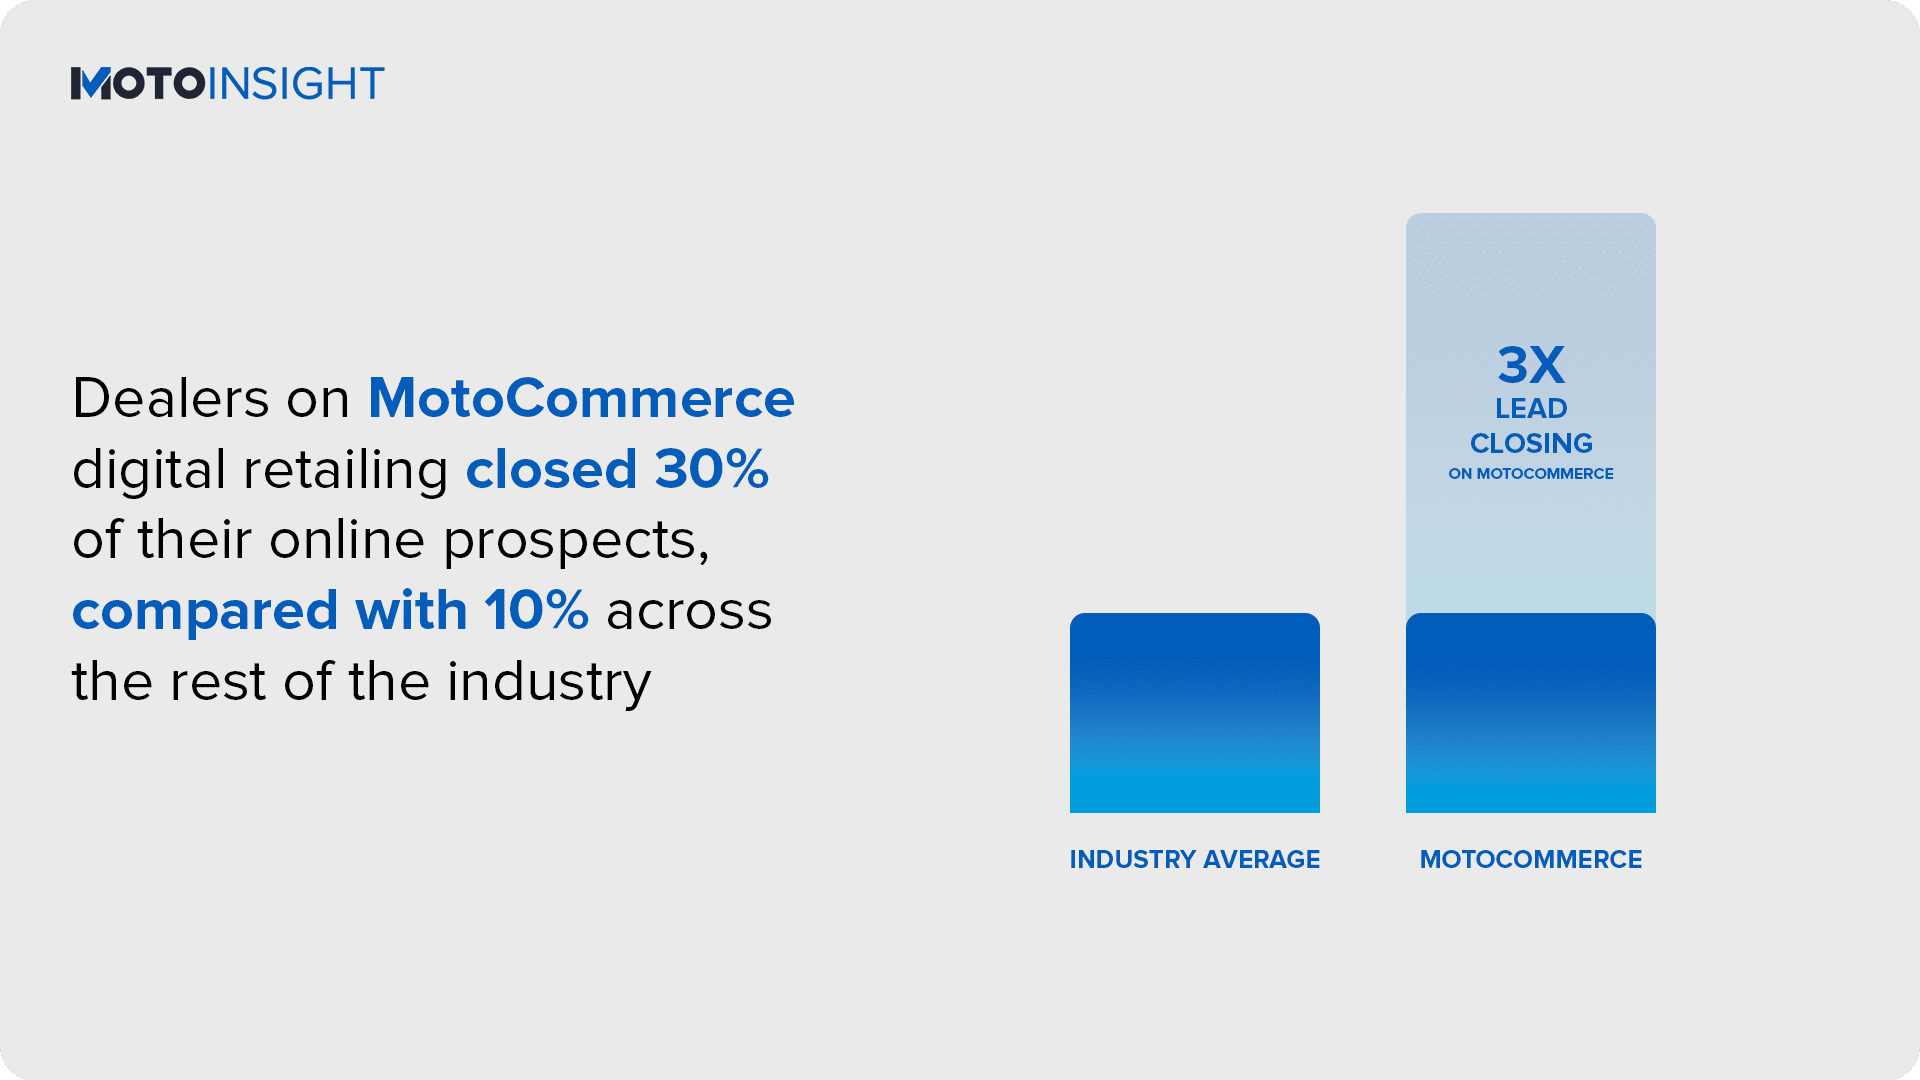 Dealers on MotoCommerce digital retailing closed 30% of their online prospects, compared with 10% across the rest of the industry